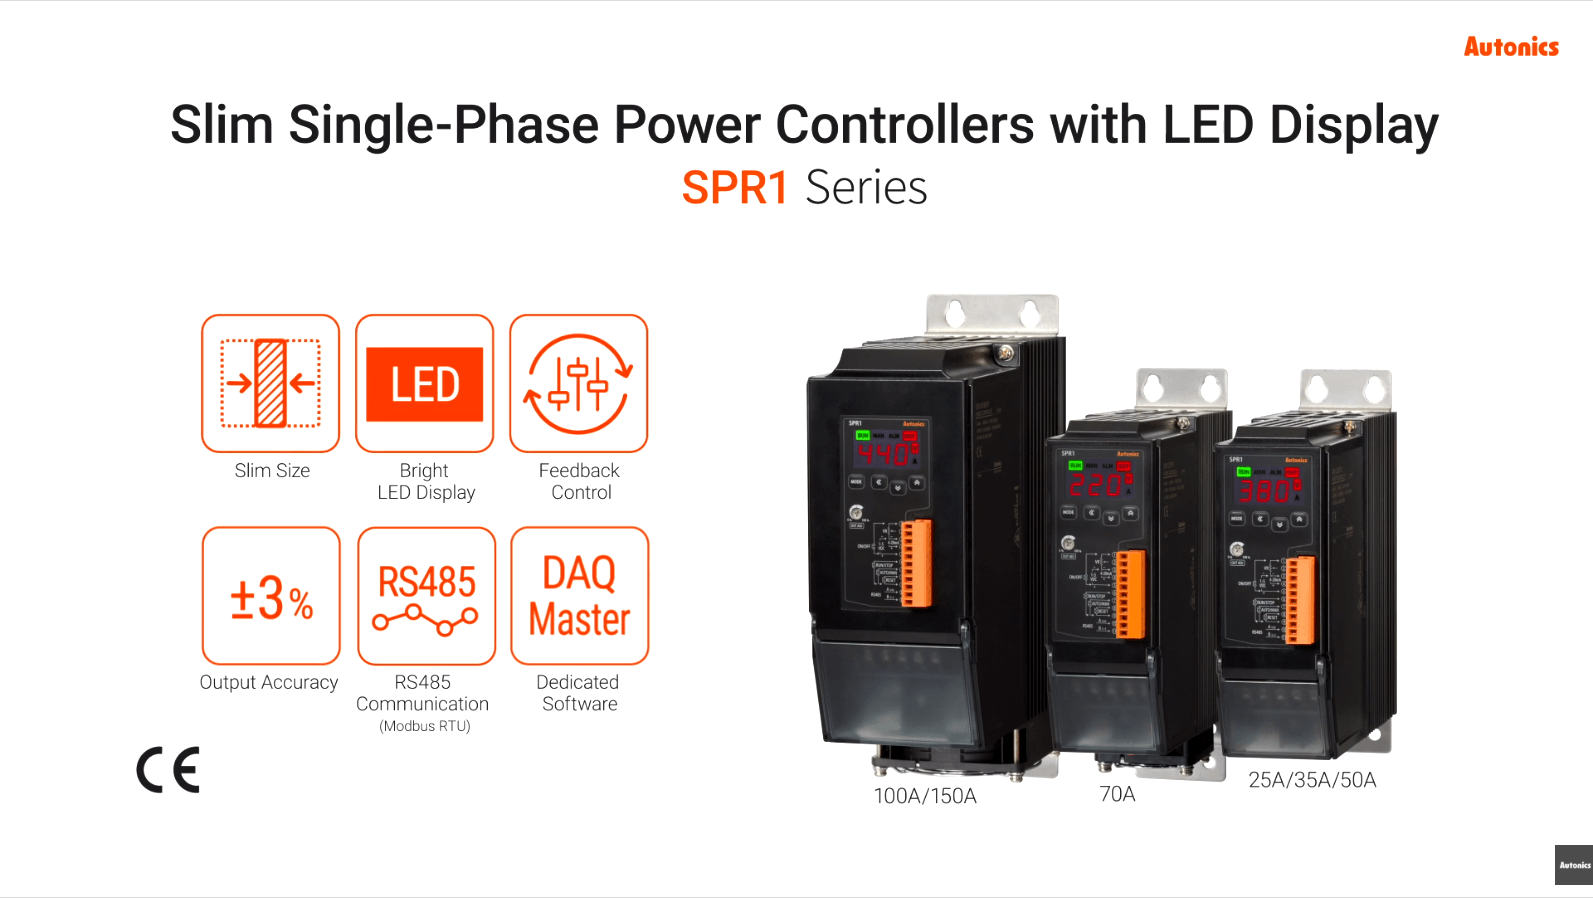 Slim Single-Phase Power Controllers with LED Display SPR1 Series